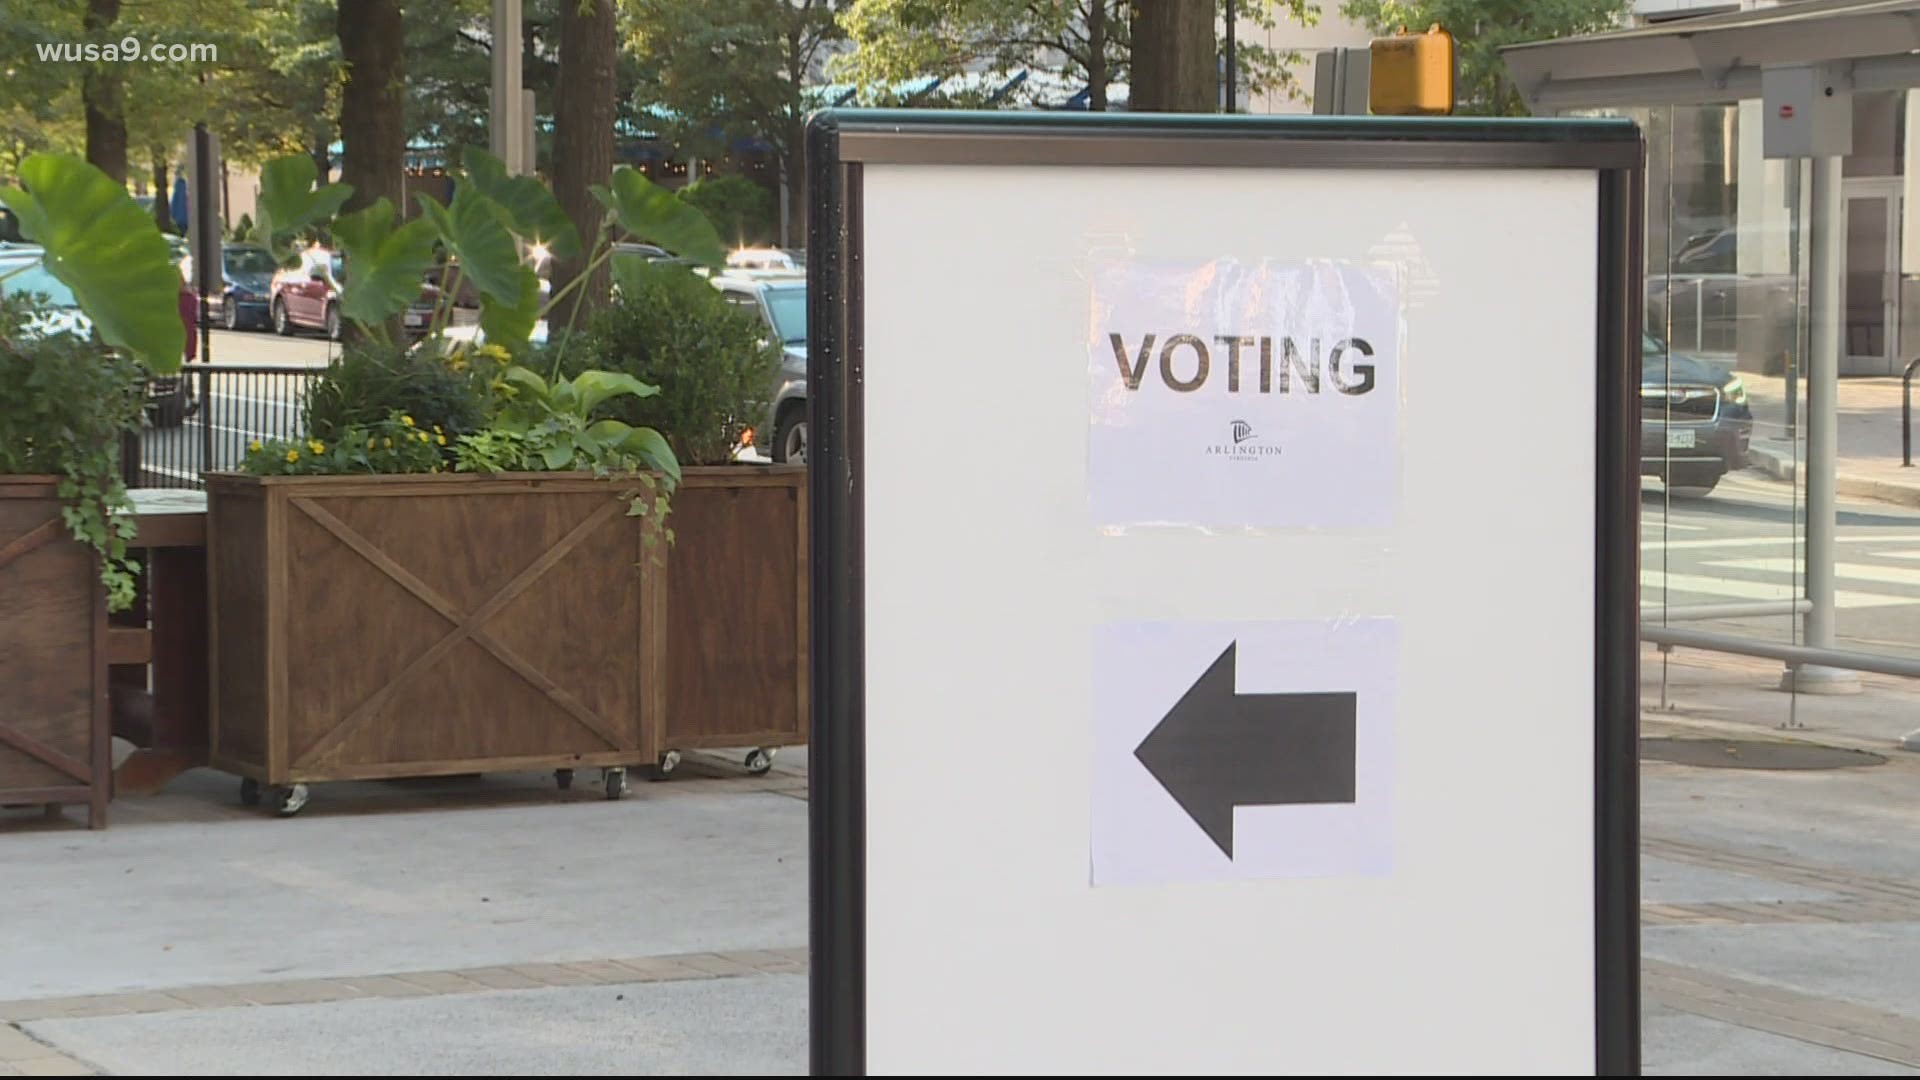 A lawsuit was filed Tuesday night to extend the voter registration deadline after system issues occurred on the last day residents could register to vote.